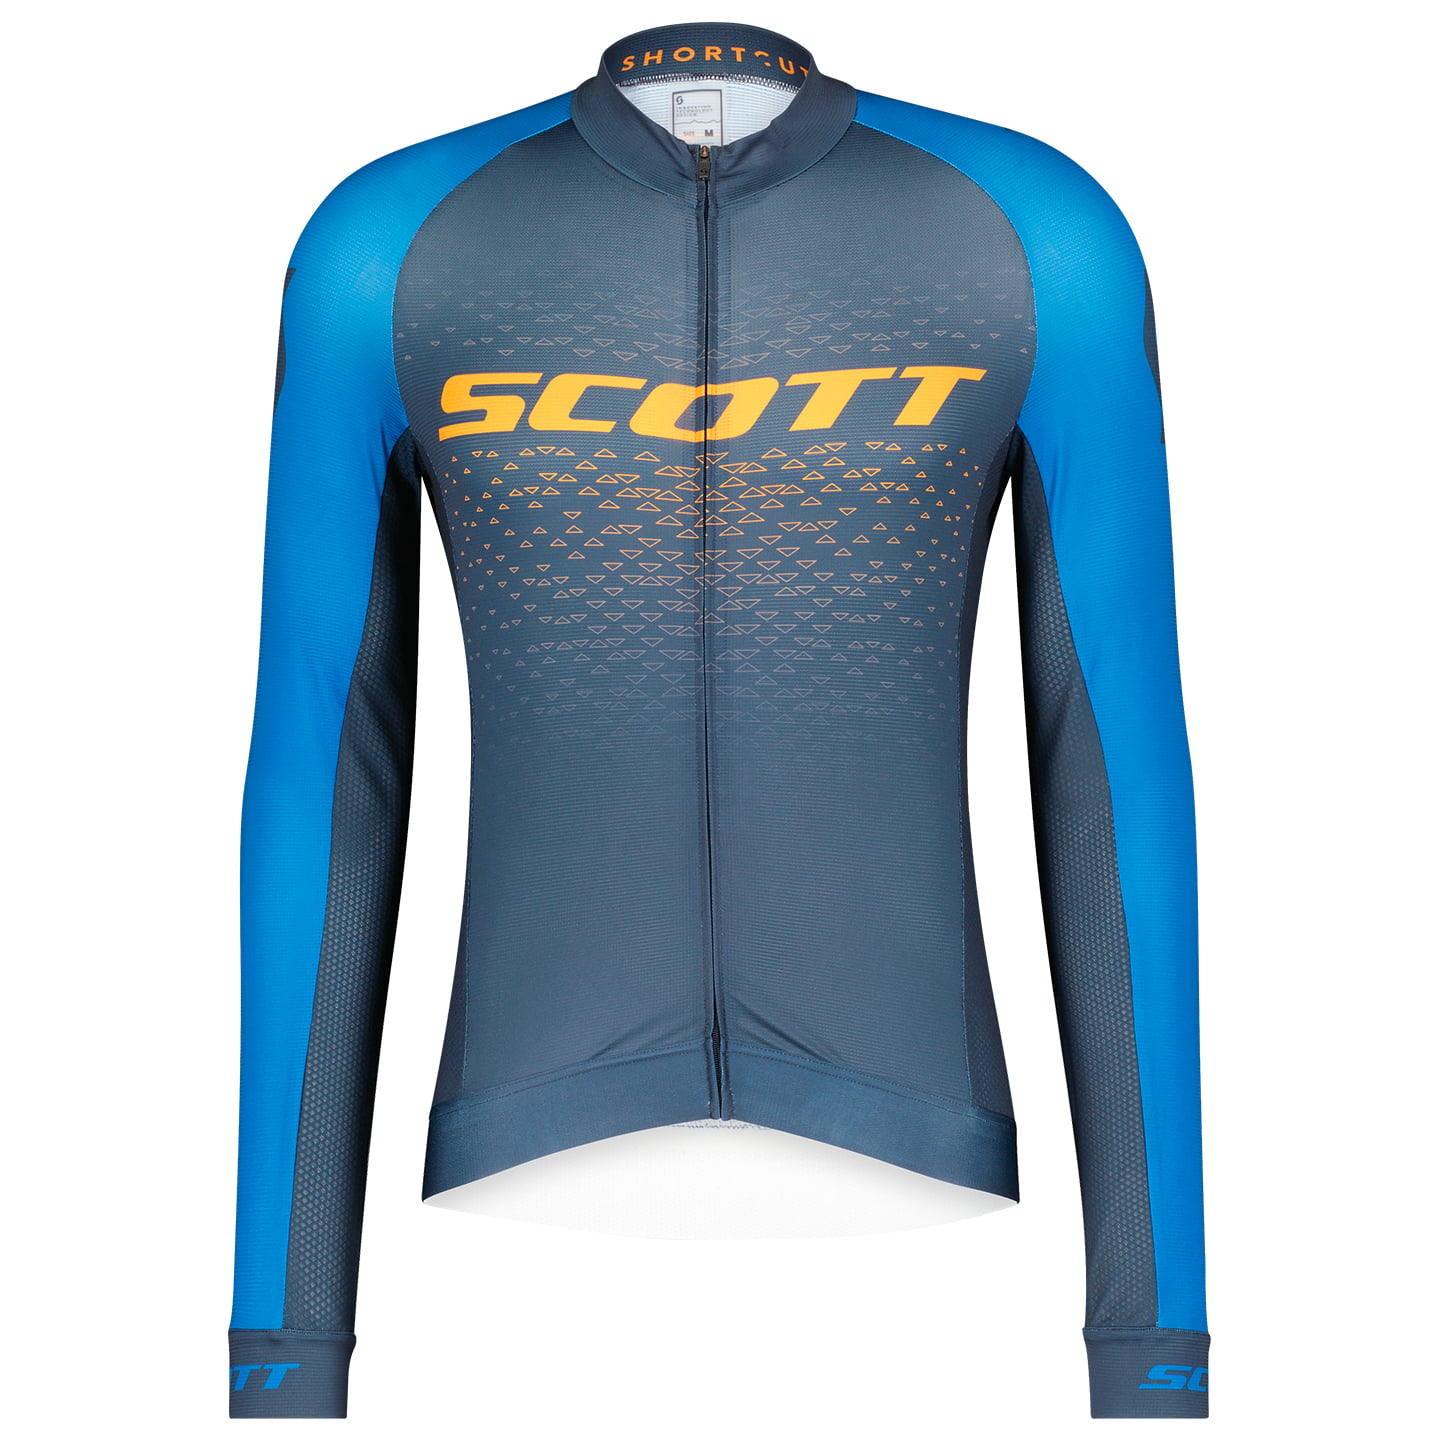 SCOTT RC Pro Long Sleeve Jersey Long Sleeve Jersey, for men, size M, Cycling jersey, Cycling clothing